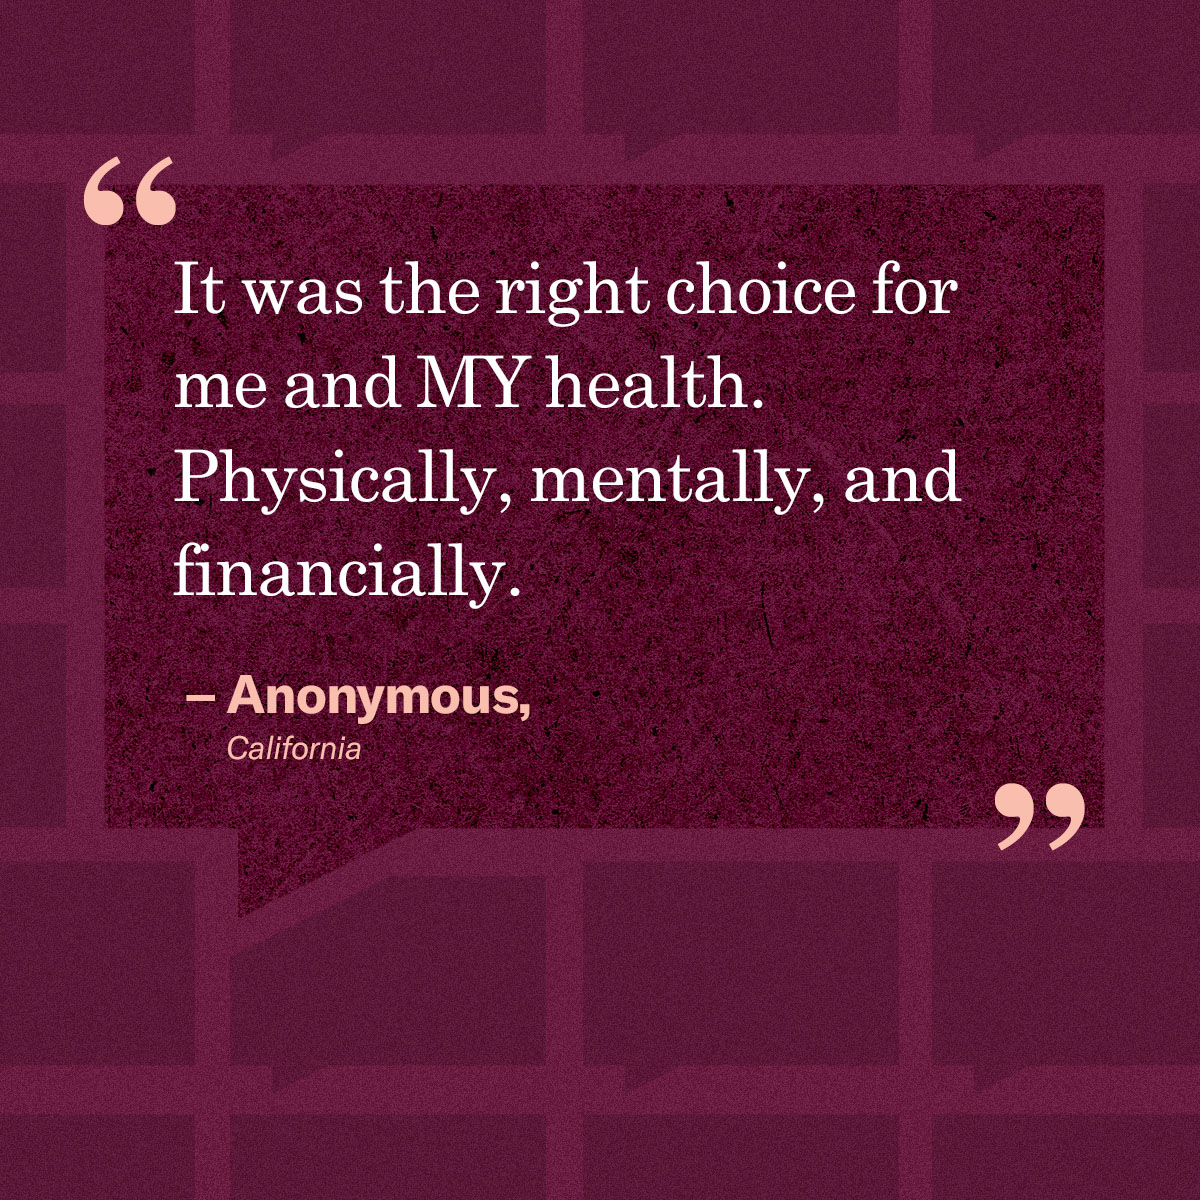 “It was the right choice for me and MY health. Physically, mentally, and financially.” – Anonymous, California